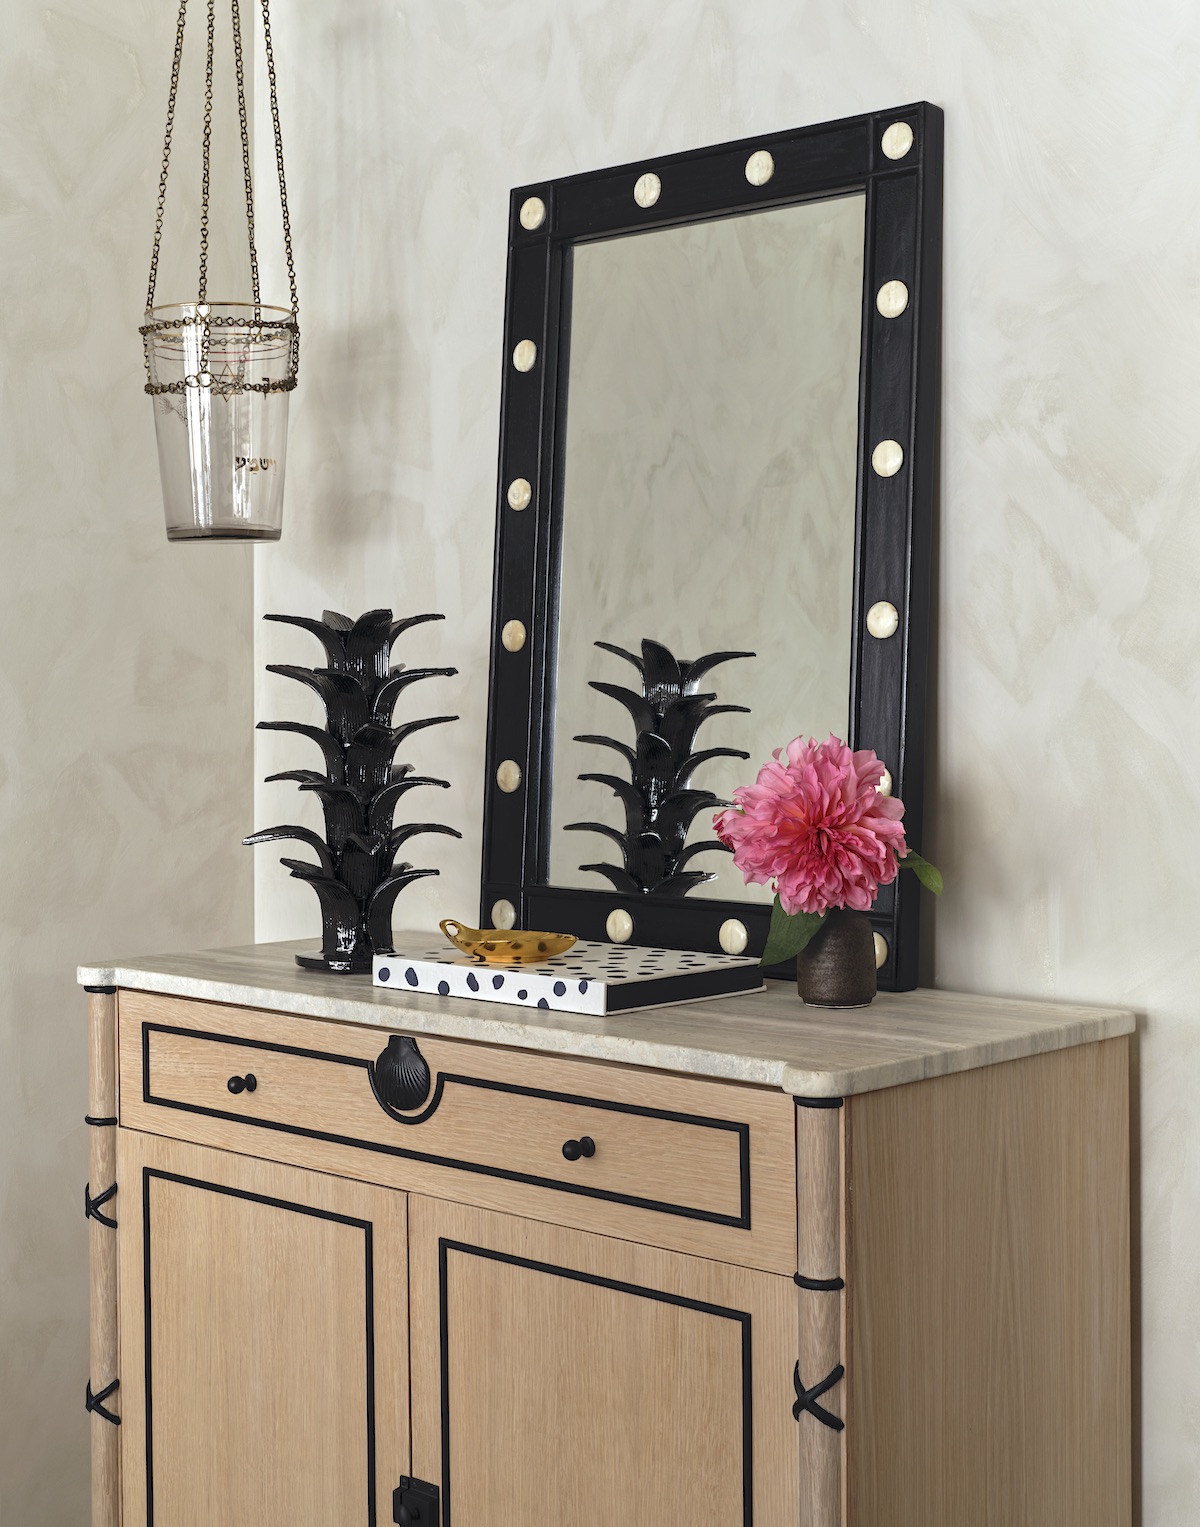 Light wood chest with black framed mirror on top.